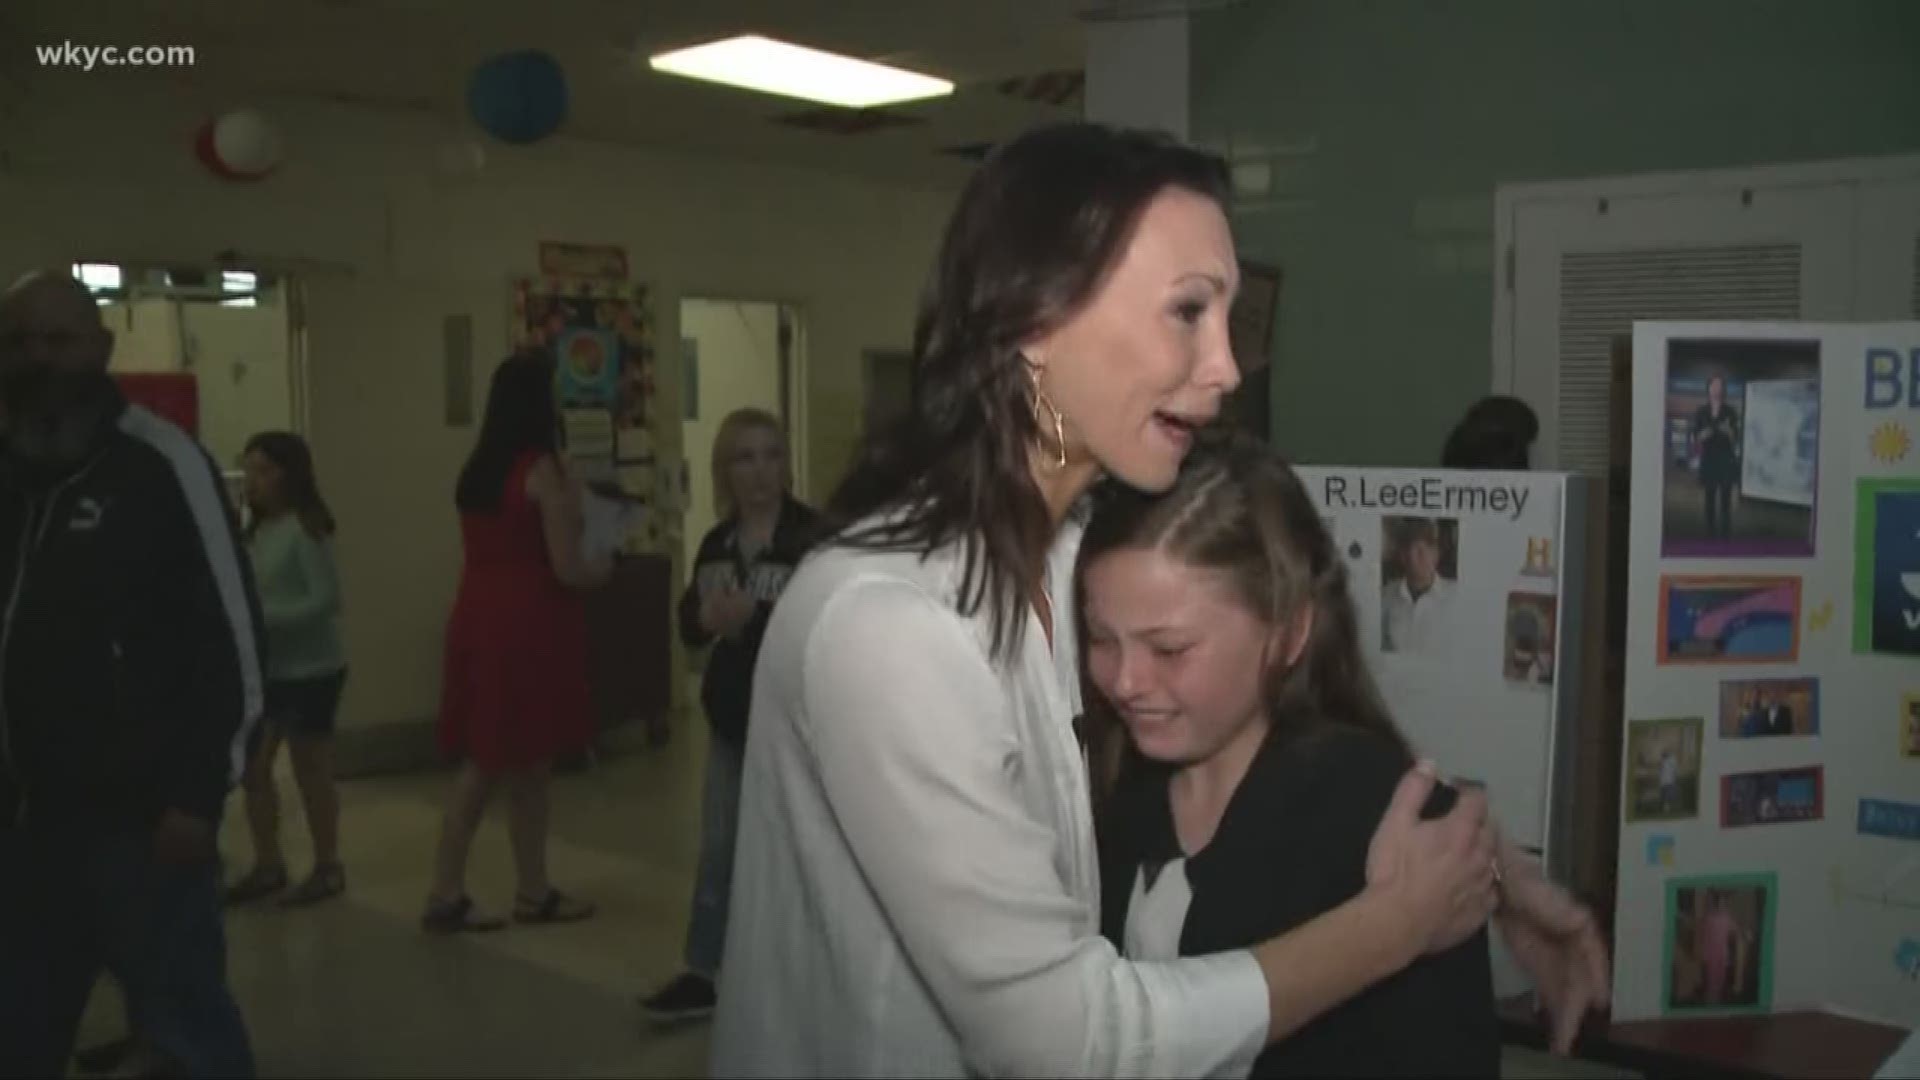 Betsy Kling surprises Norton student who dressed like her for school project